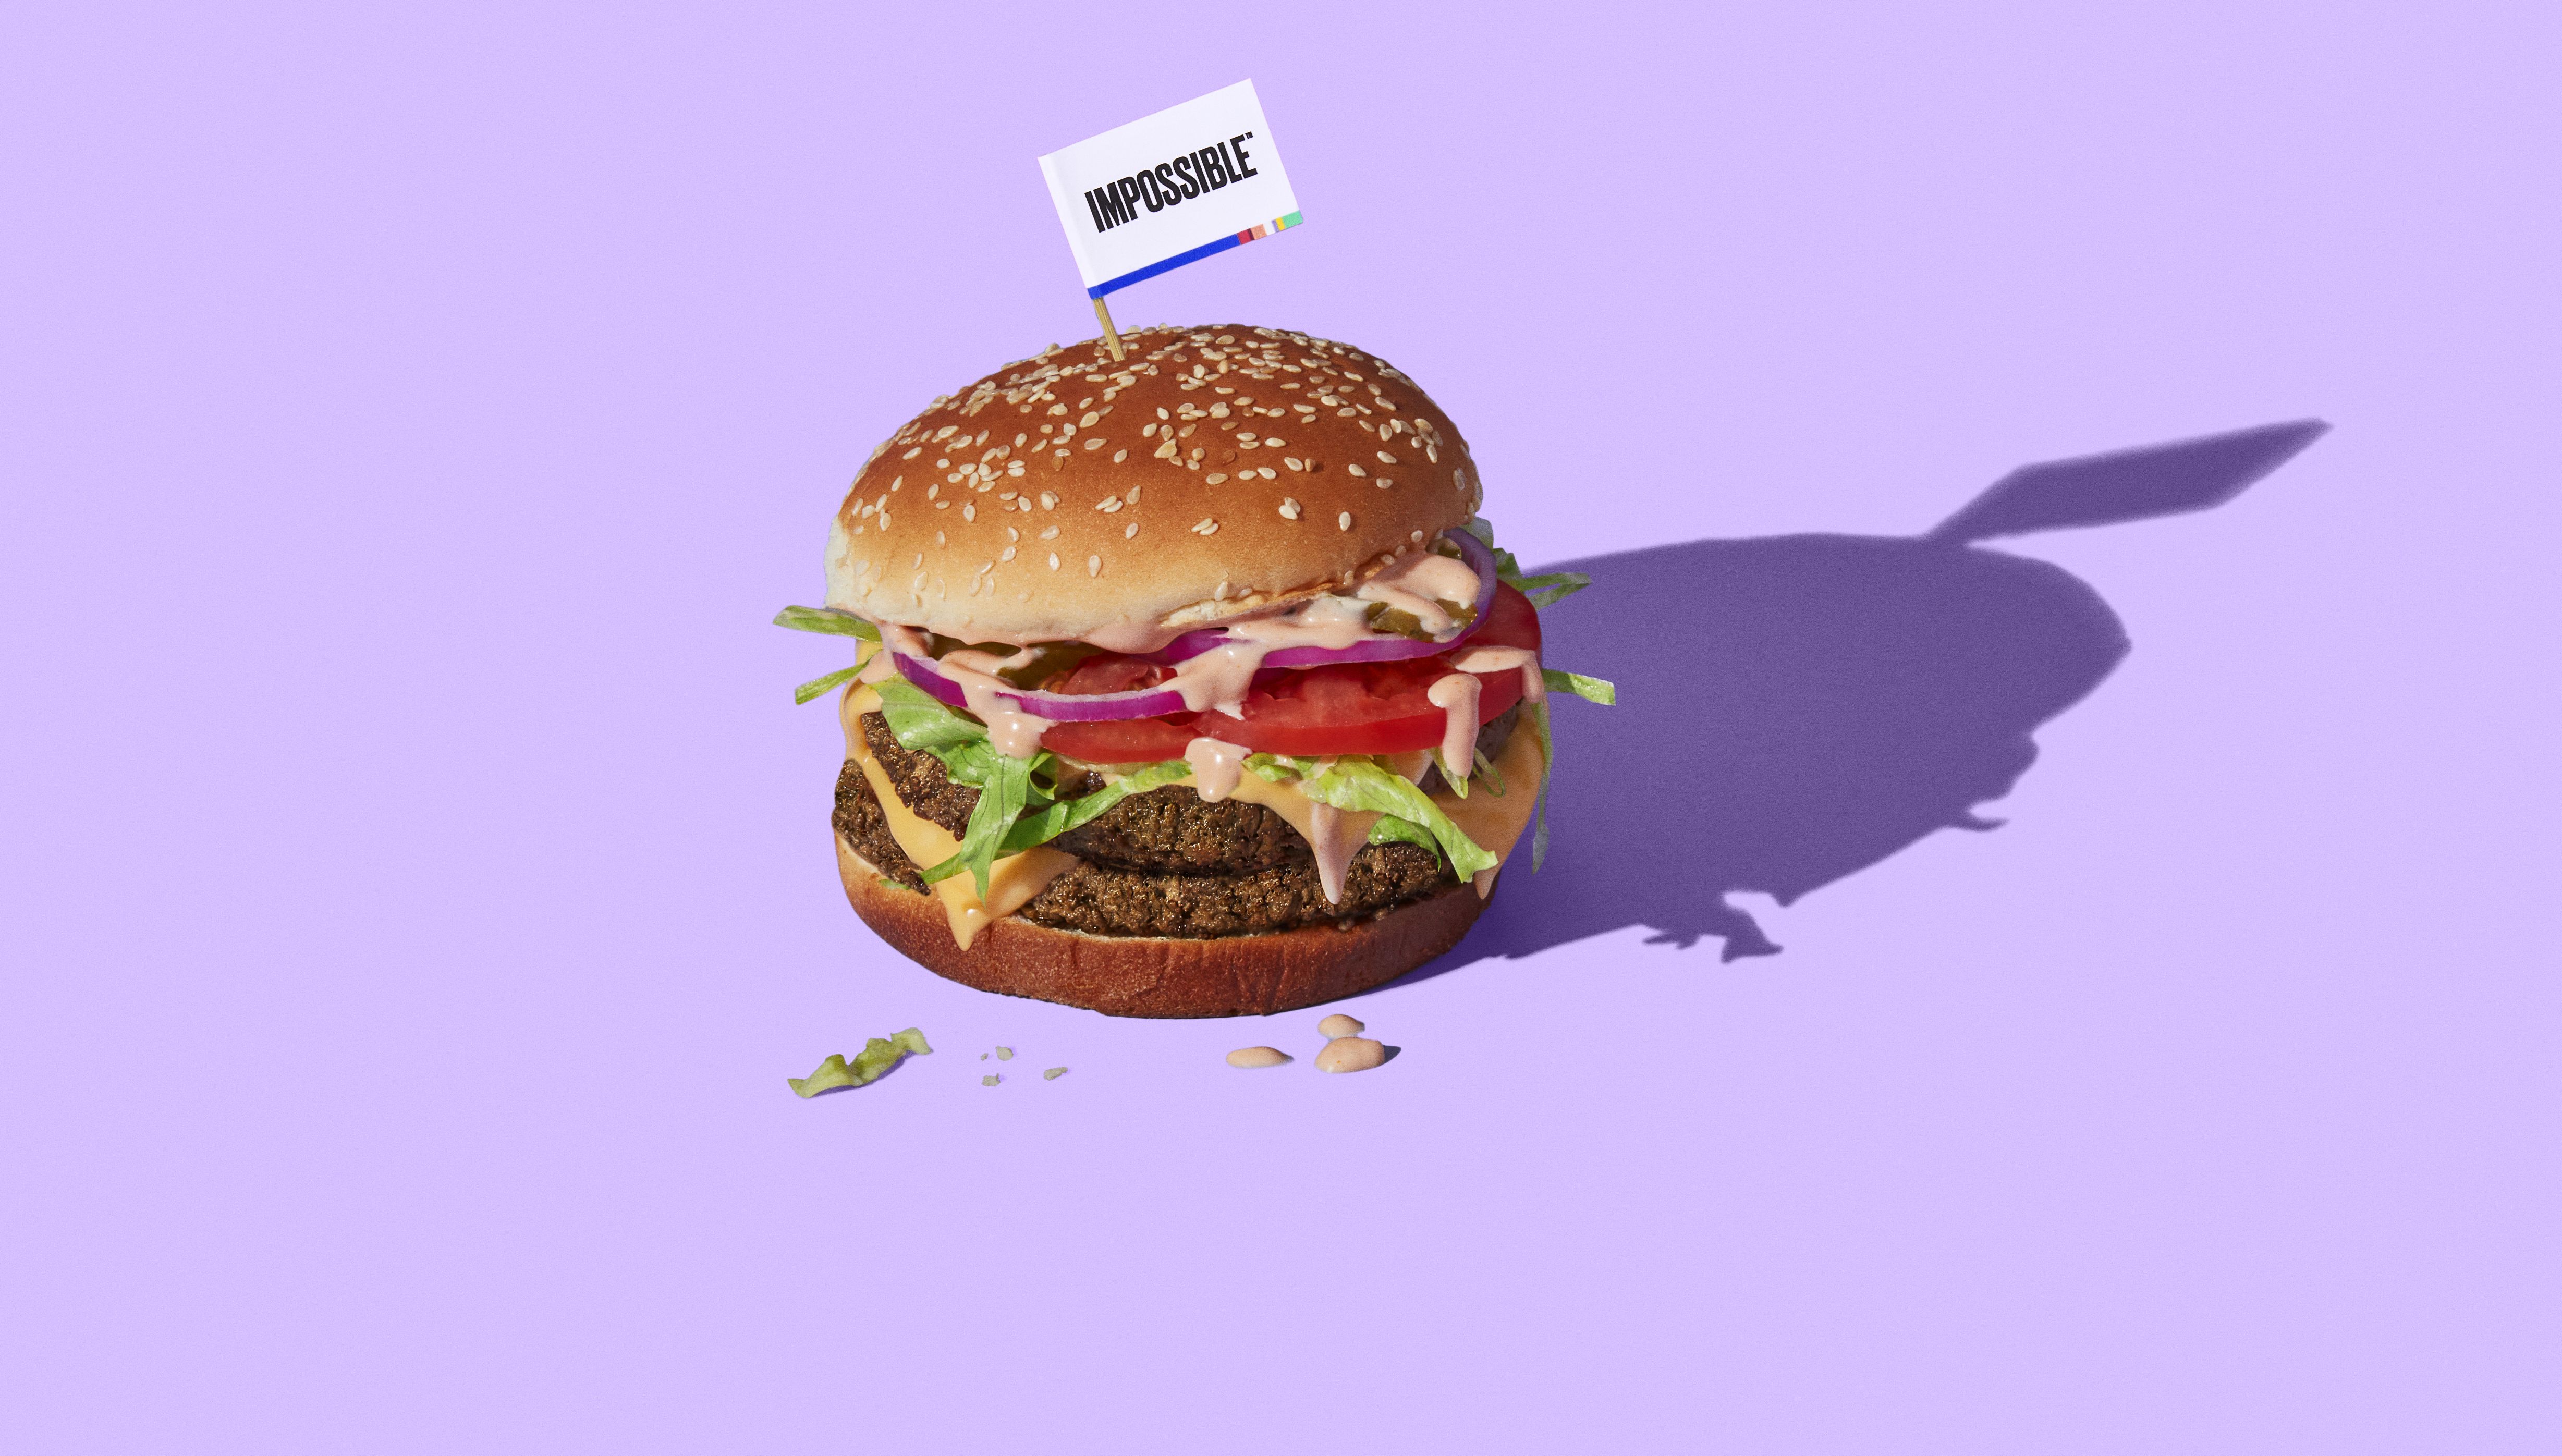 Impossible Burger